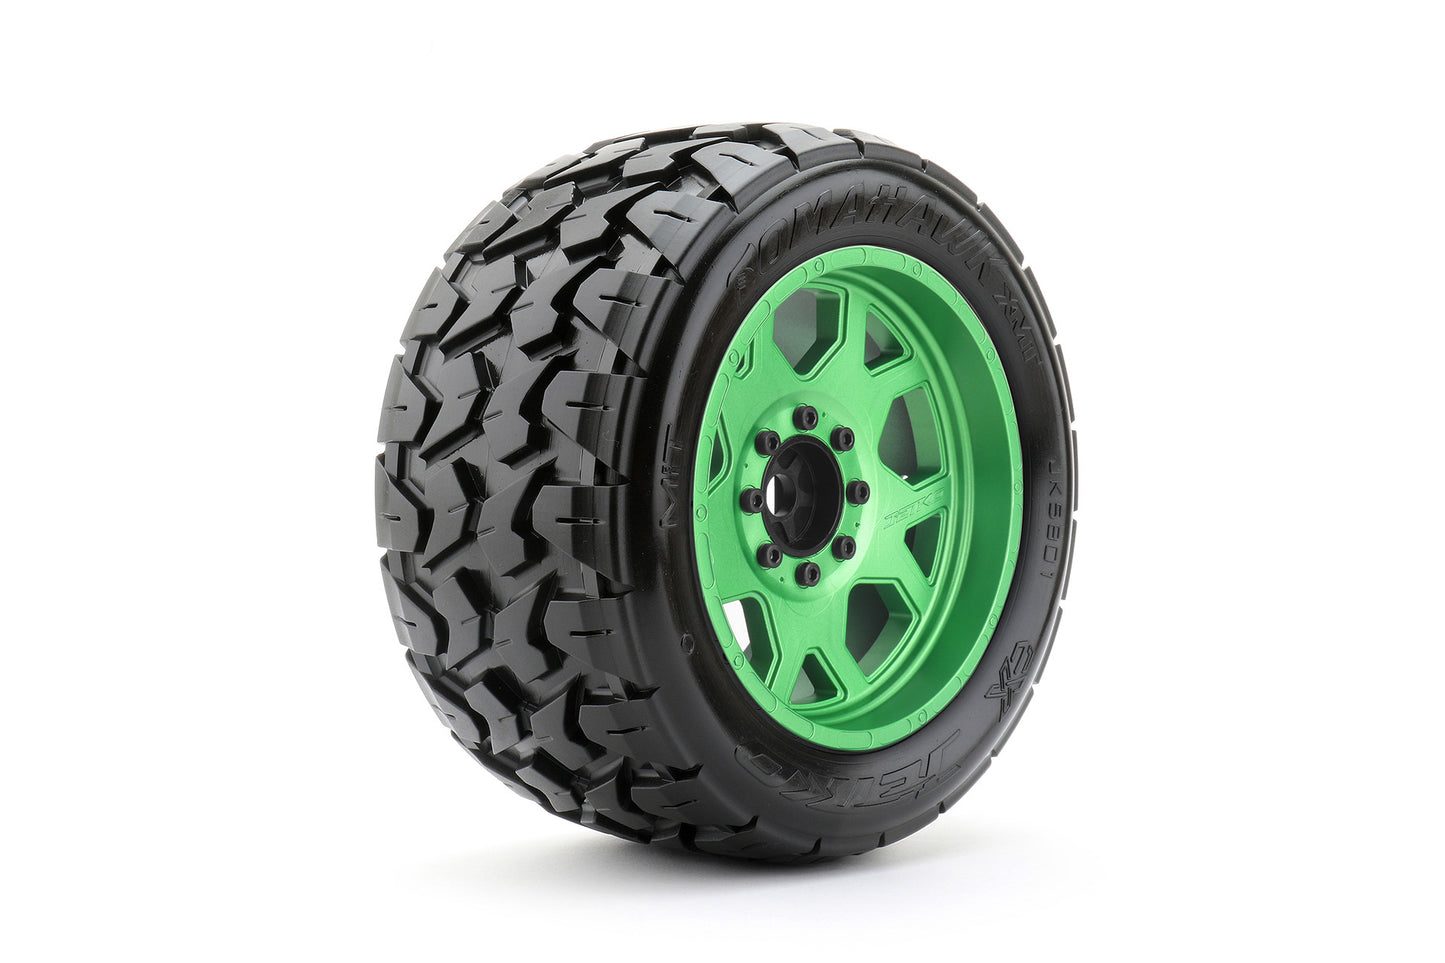 1/5 XMT EX- Tomahawk Tires Mounted on Metal Claw Rims, Medium Soft, Belted, 24mm, for Traxxas X-Maxx